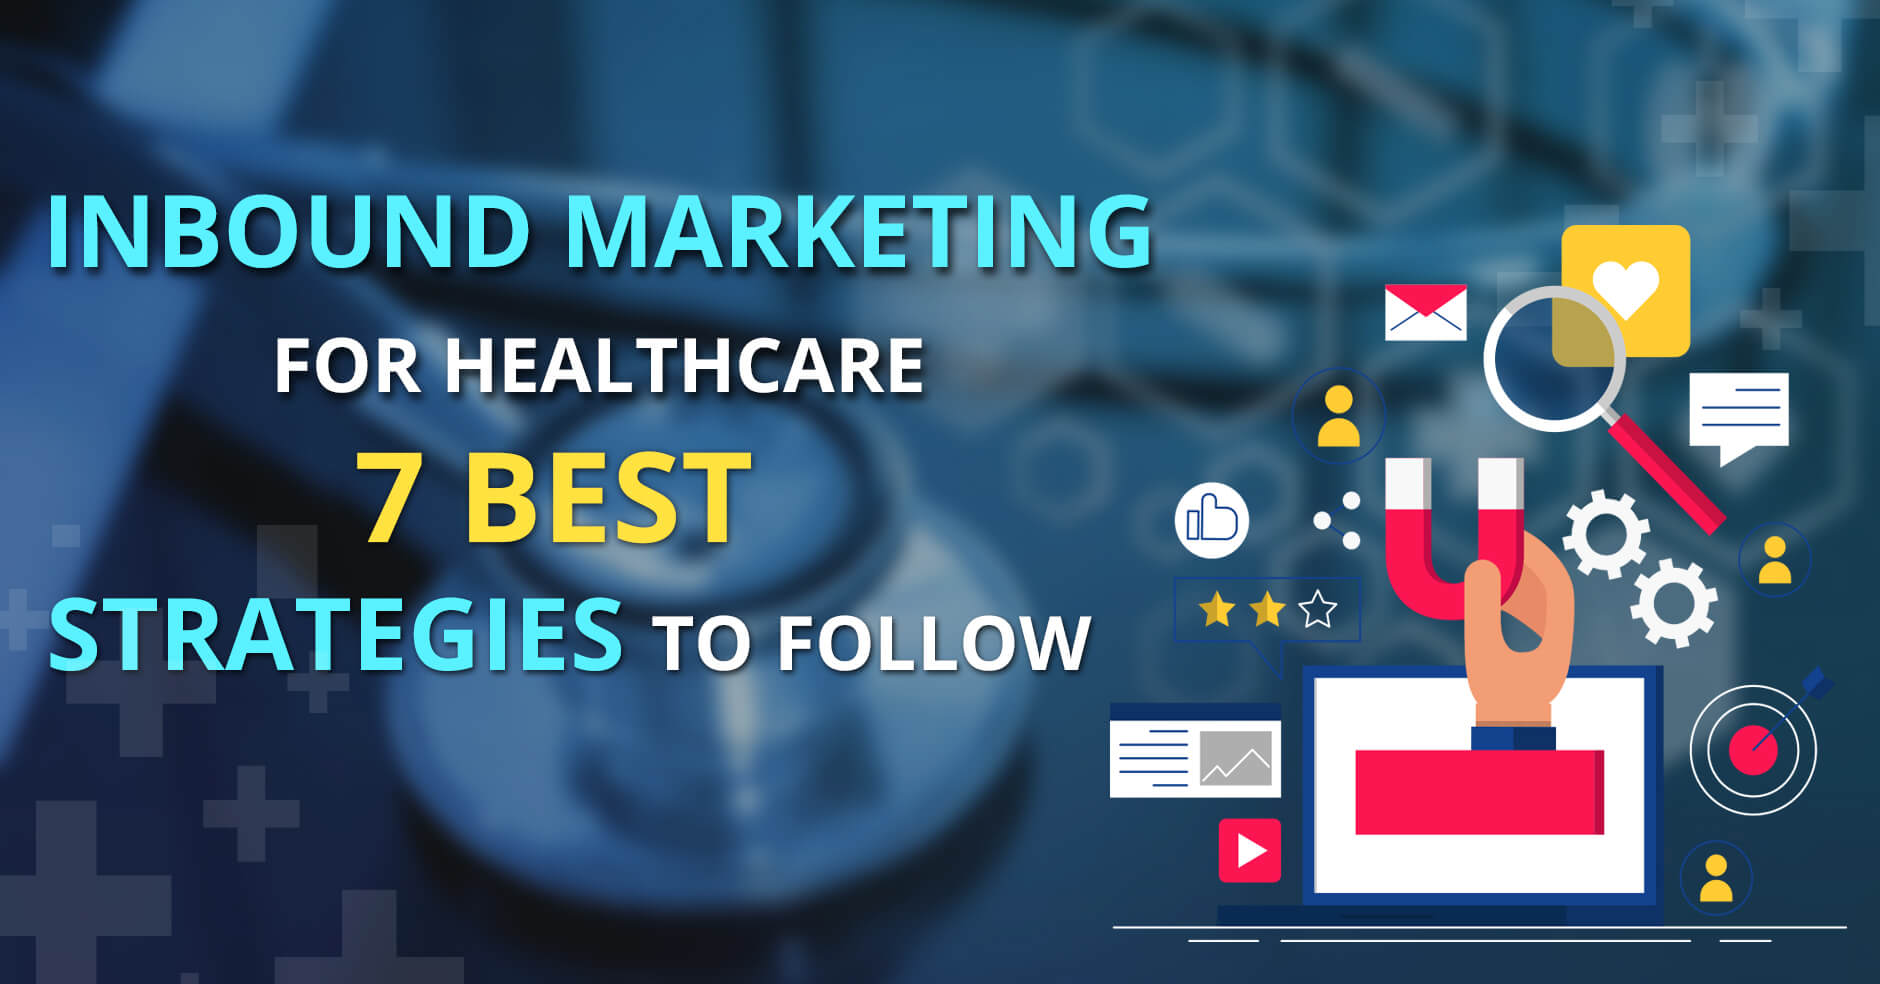 Inbound Marketing for Healthcare -7 Best Strategies to Follow